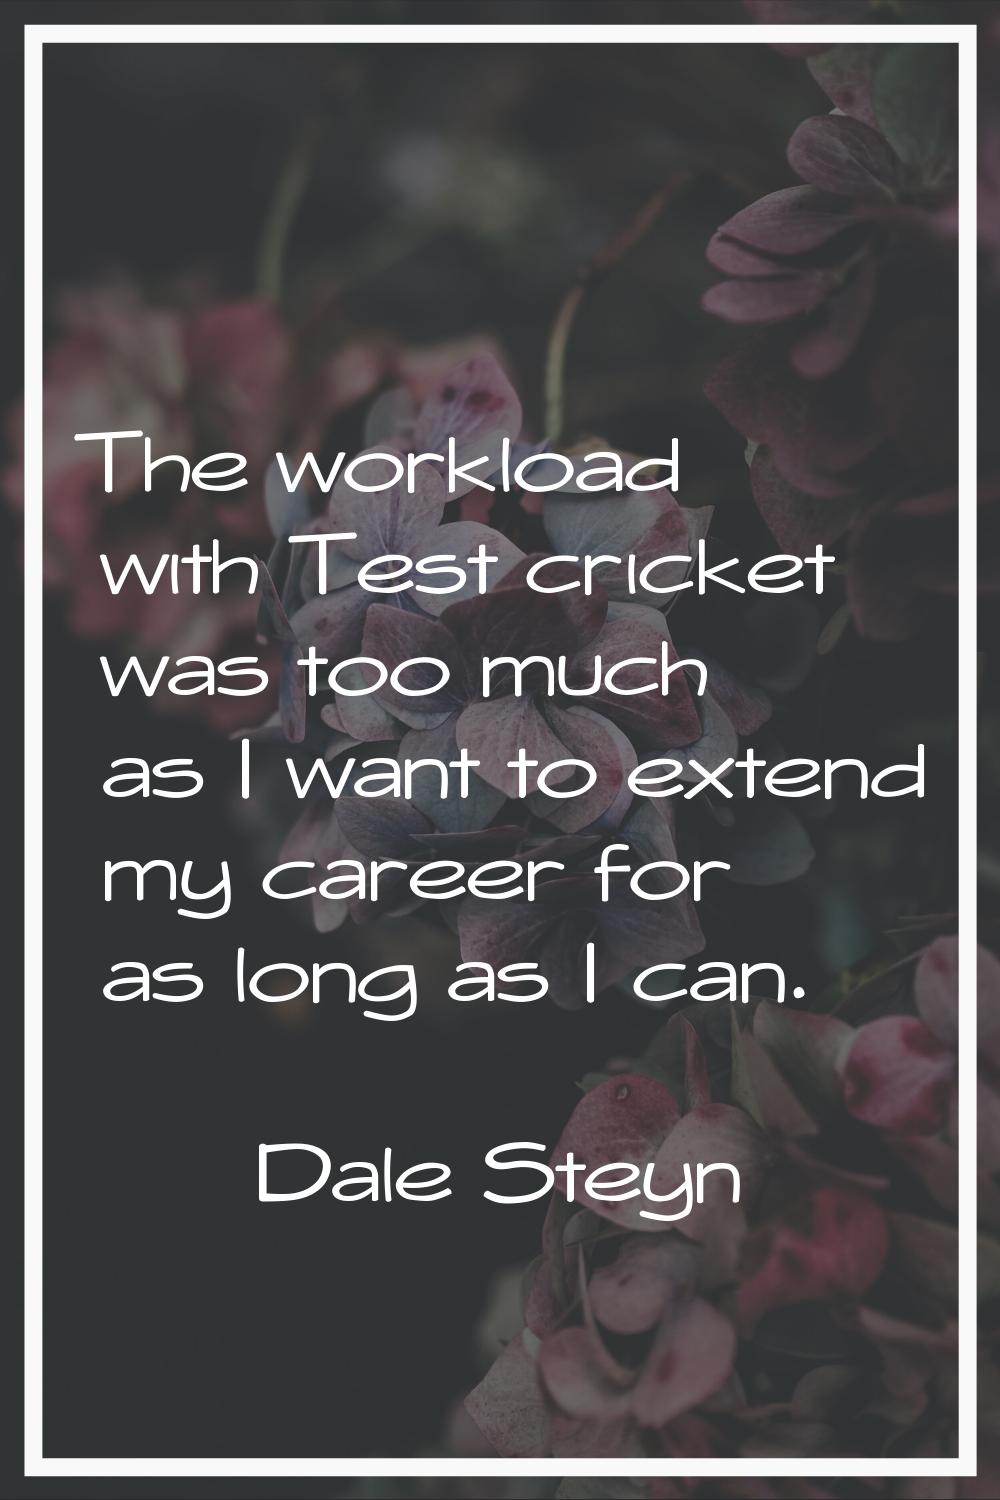 The workload with Test cricket was too much as I want to extend my career for as long as I can.